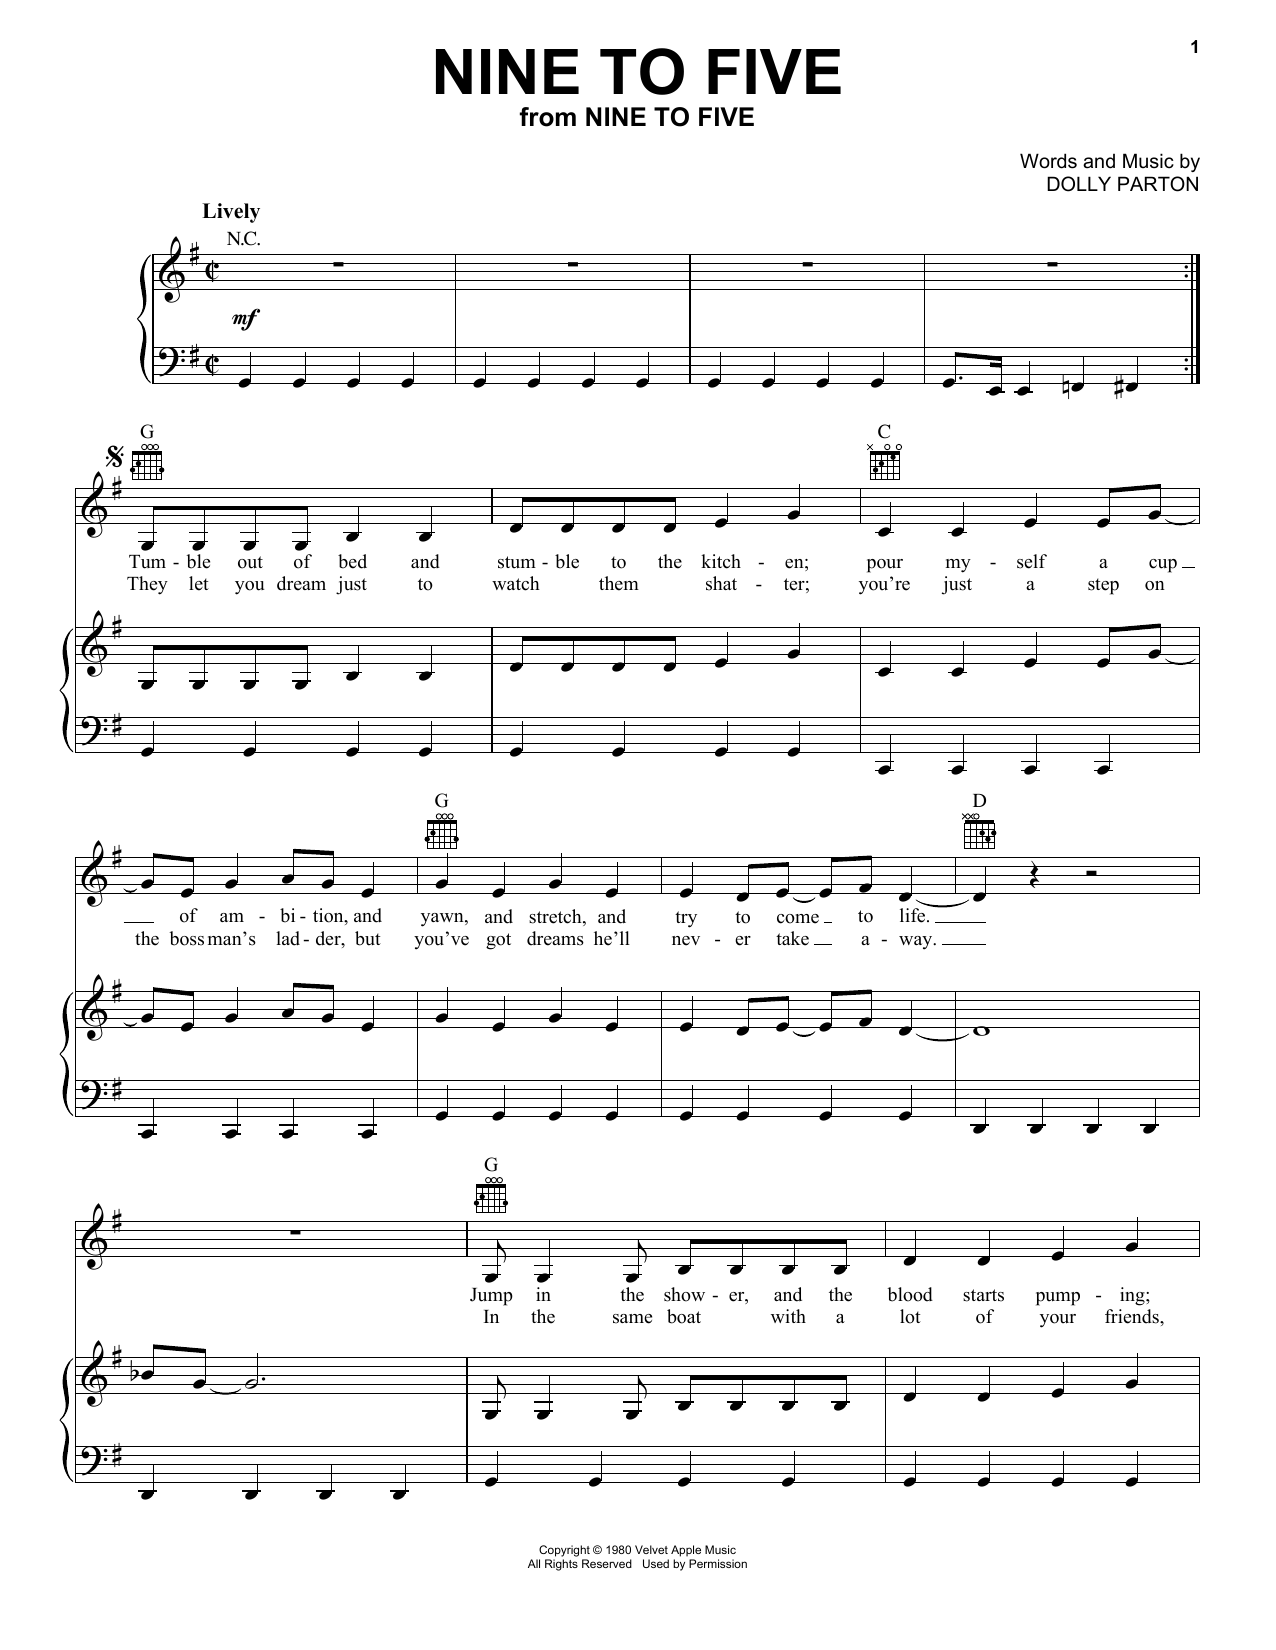 Download Dolly Parton Nine To Five Sheet Music